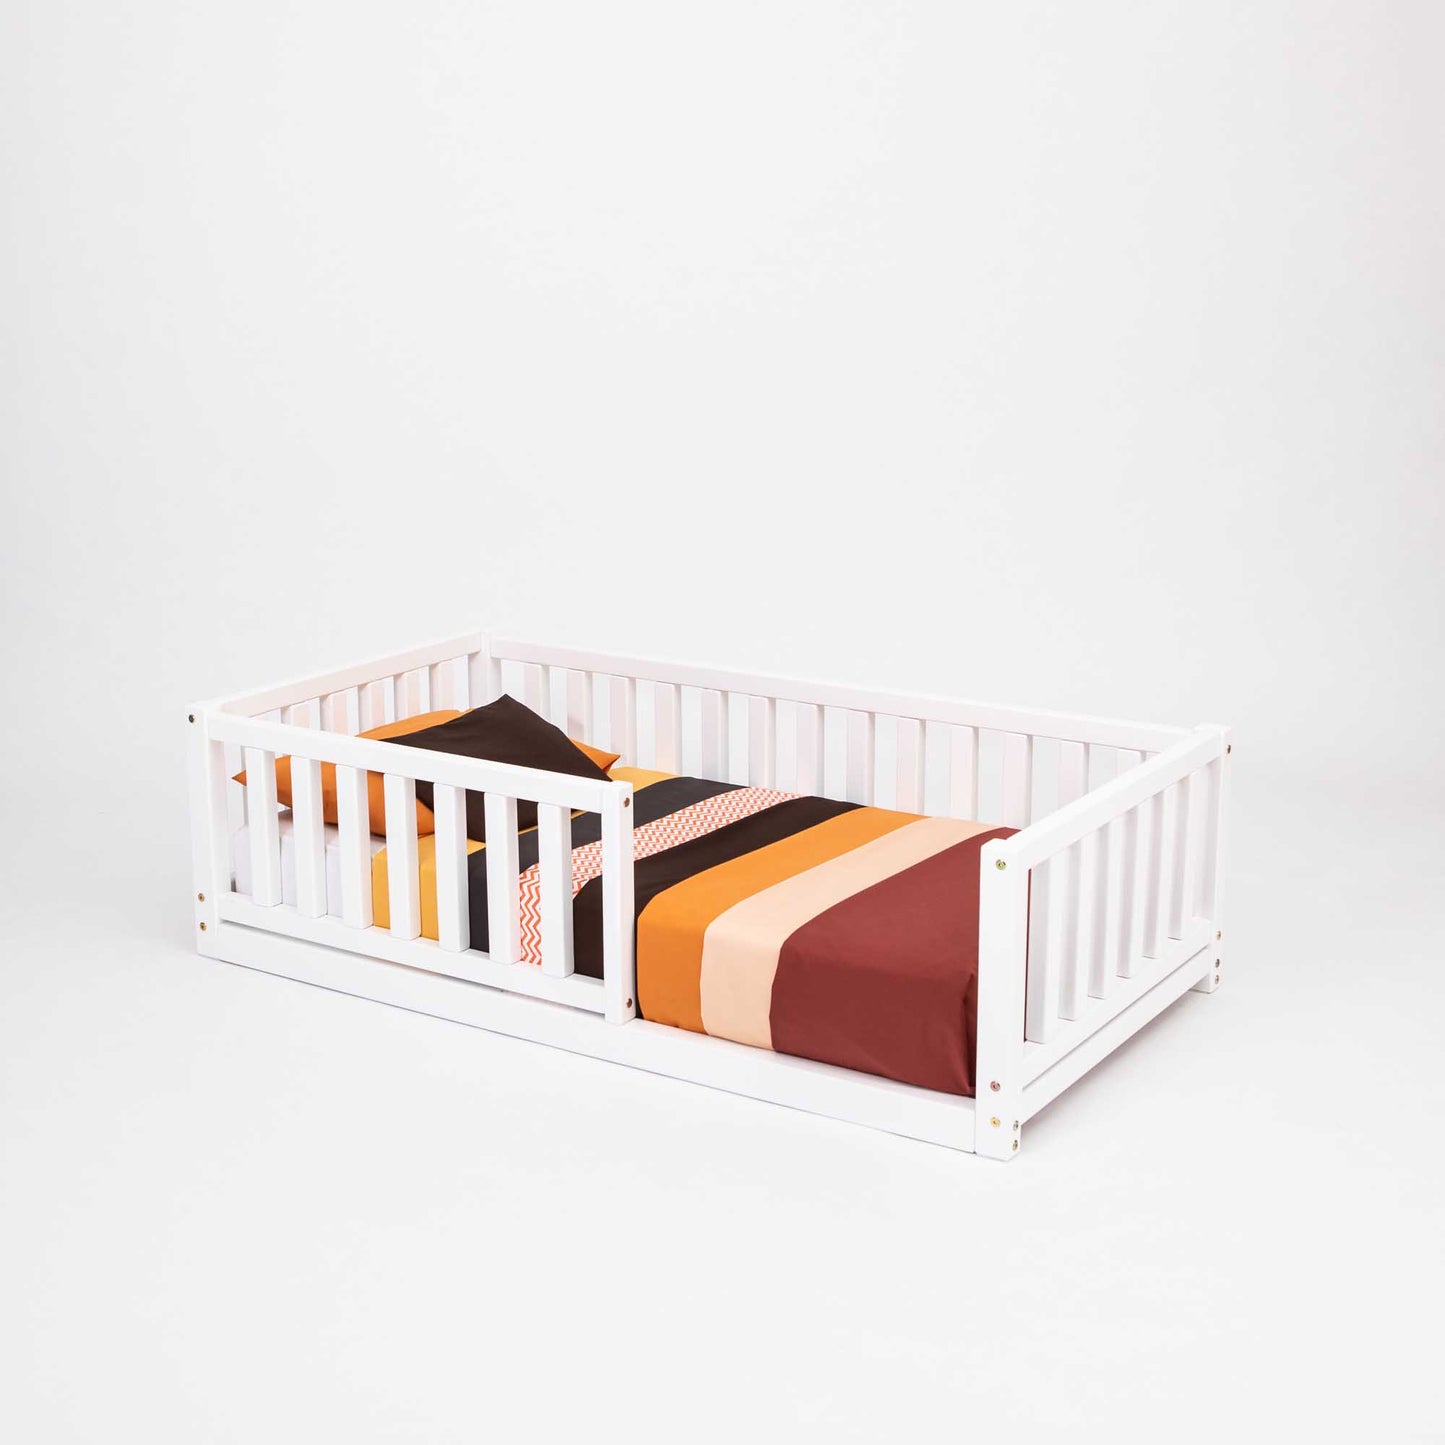 An independent Montessori kids' bed with a fence on it, providing security for children, from Sweet Home From Wood.